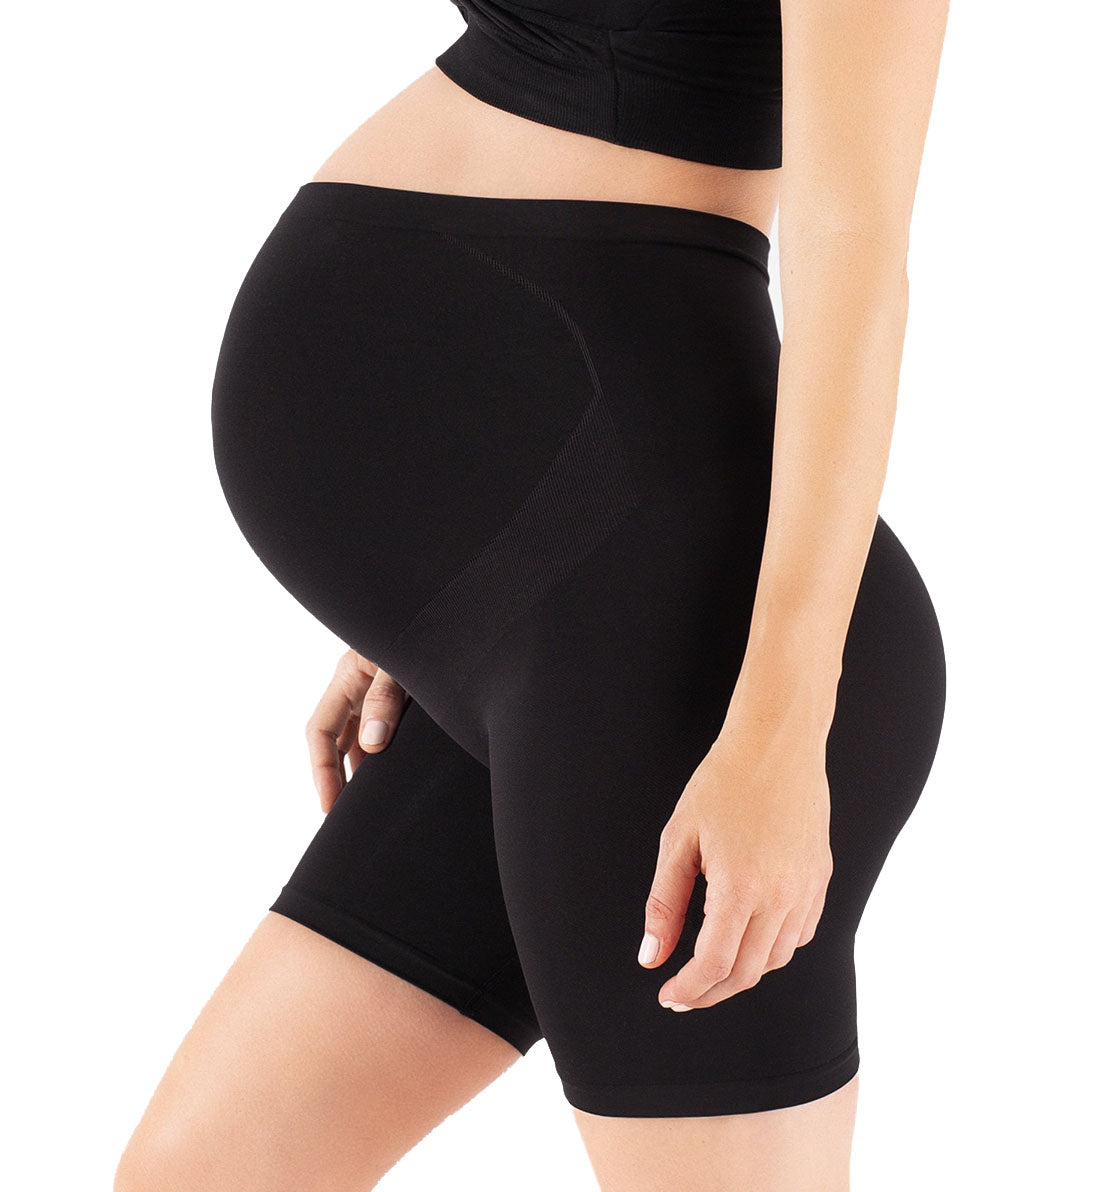 Belly Bandit Thighs Disguise Maternity Short (THIGHSD),Small,Black - Black,Small